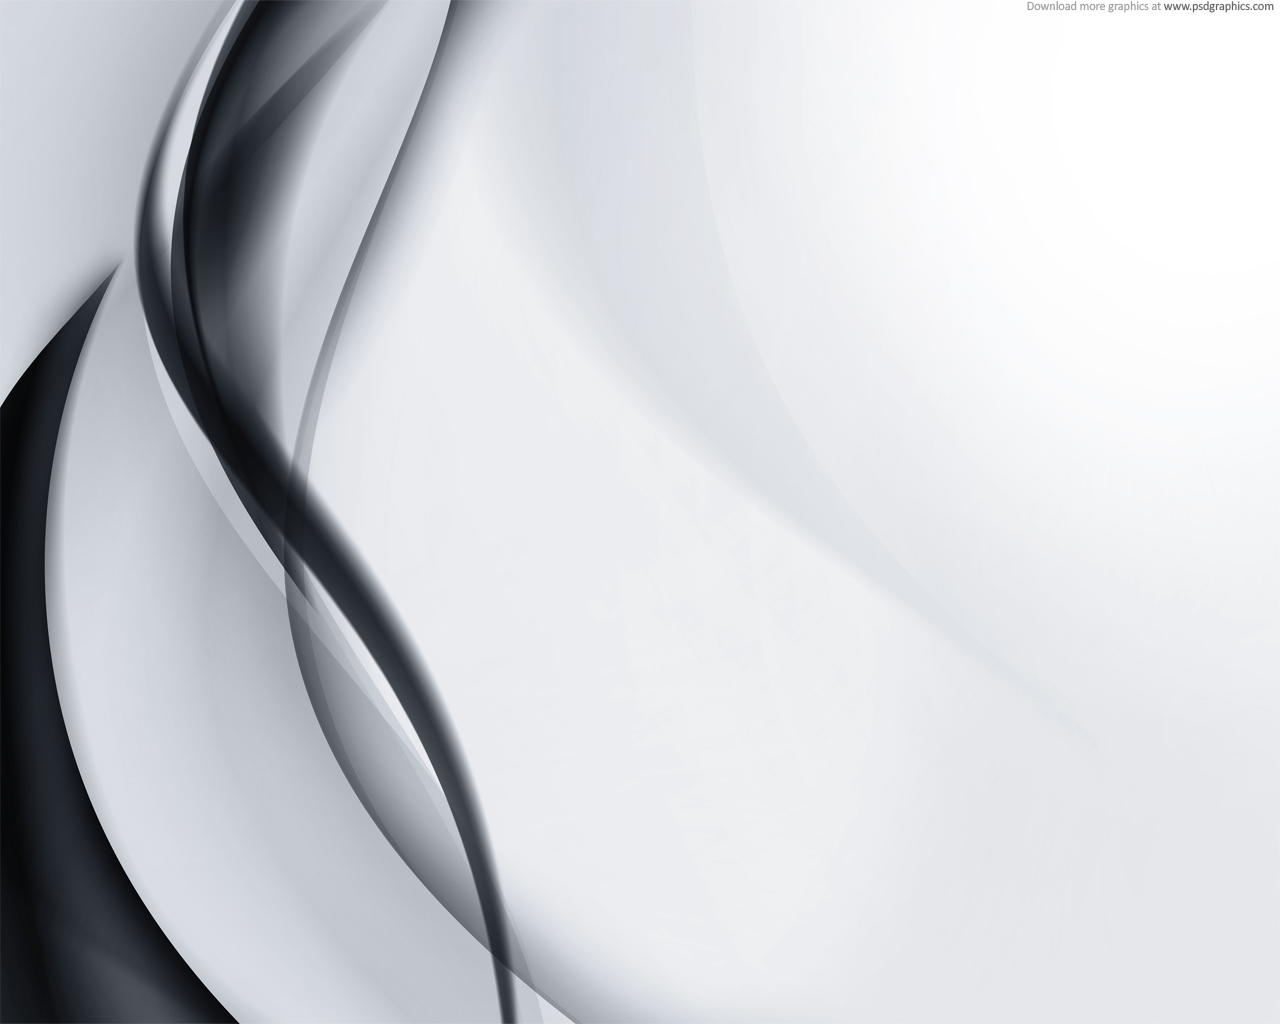 Medium size preview 1280x1024px Black and white abstract background